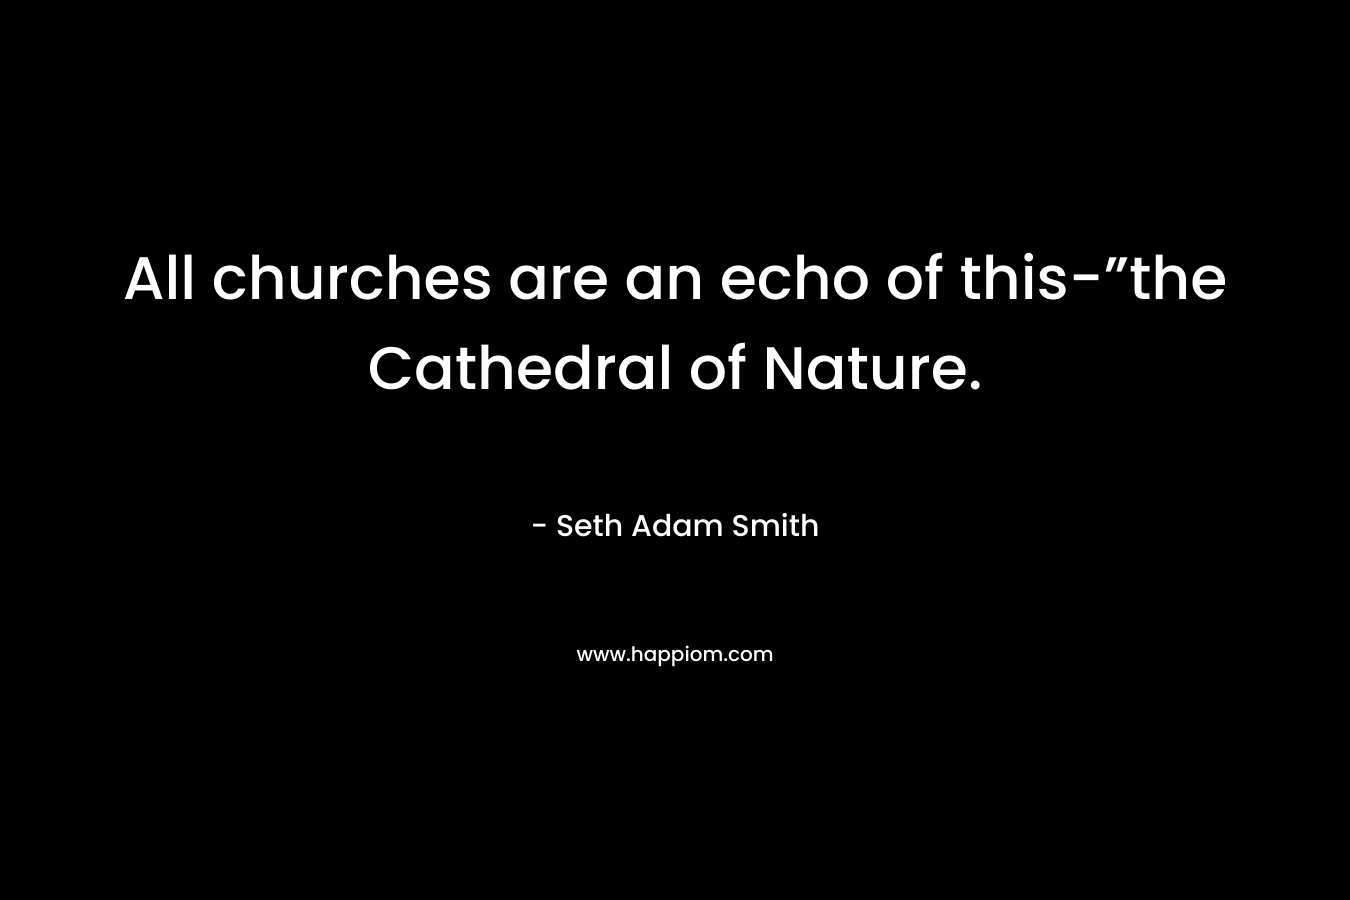 All churches are an echo of this-”the Cathedral of Nature.